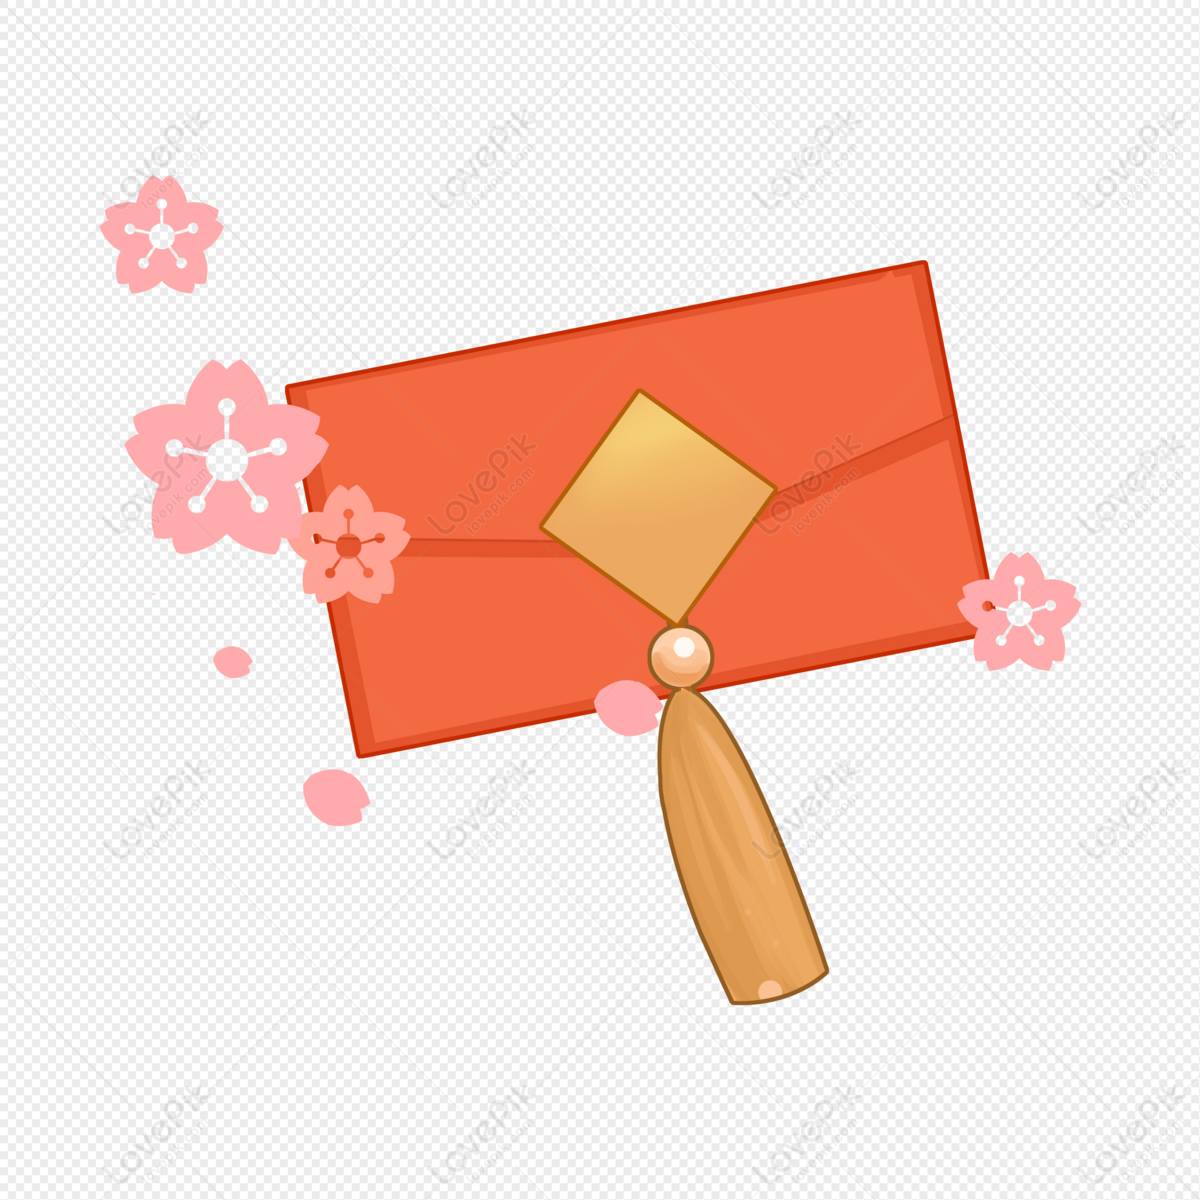 Red Envelope PNG Transparent Background And Clipart Image For Free Download  - Lovepik